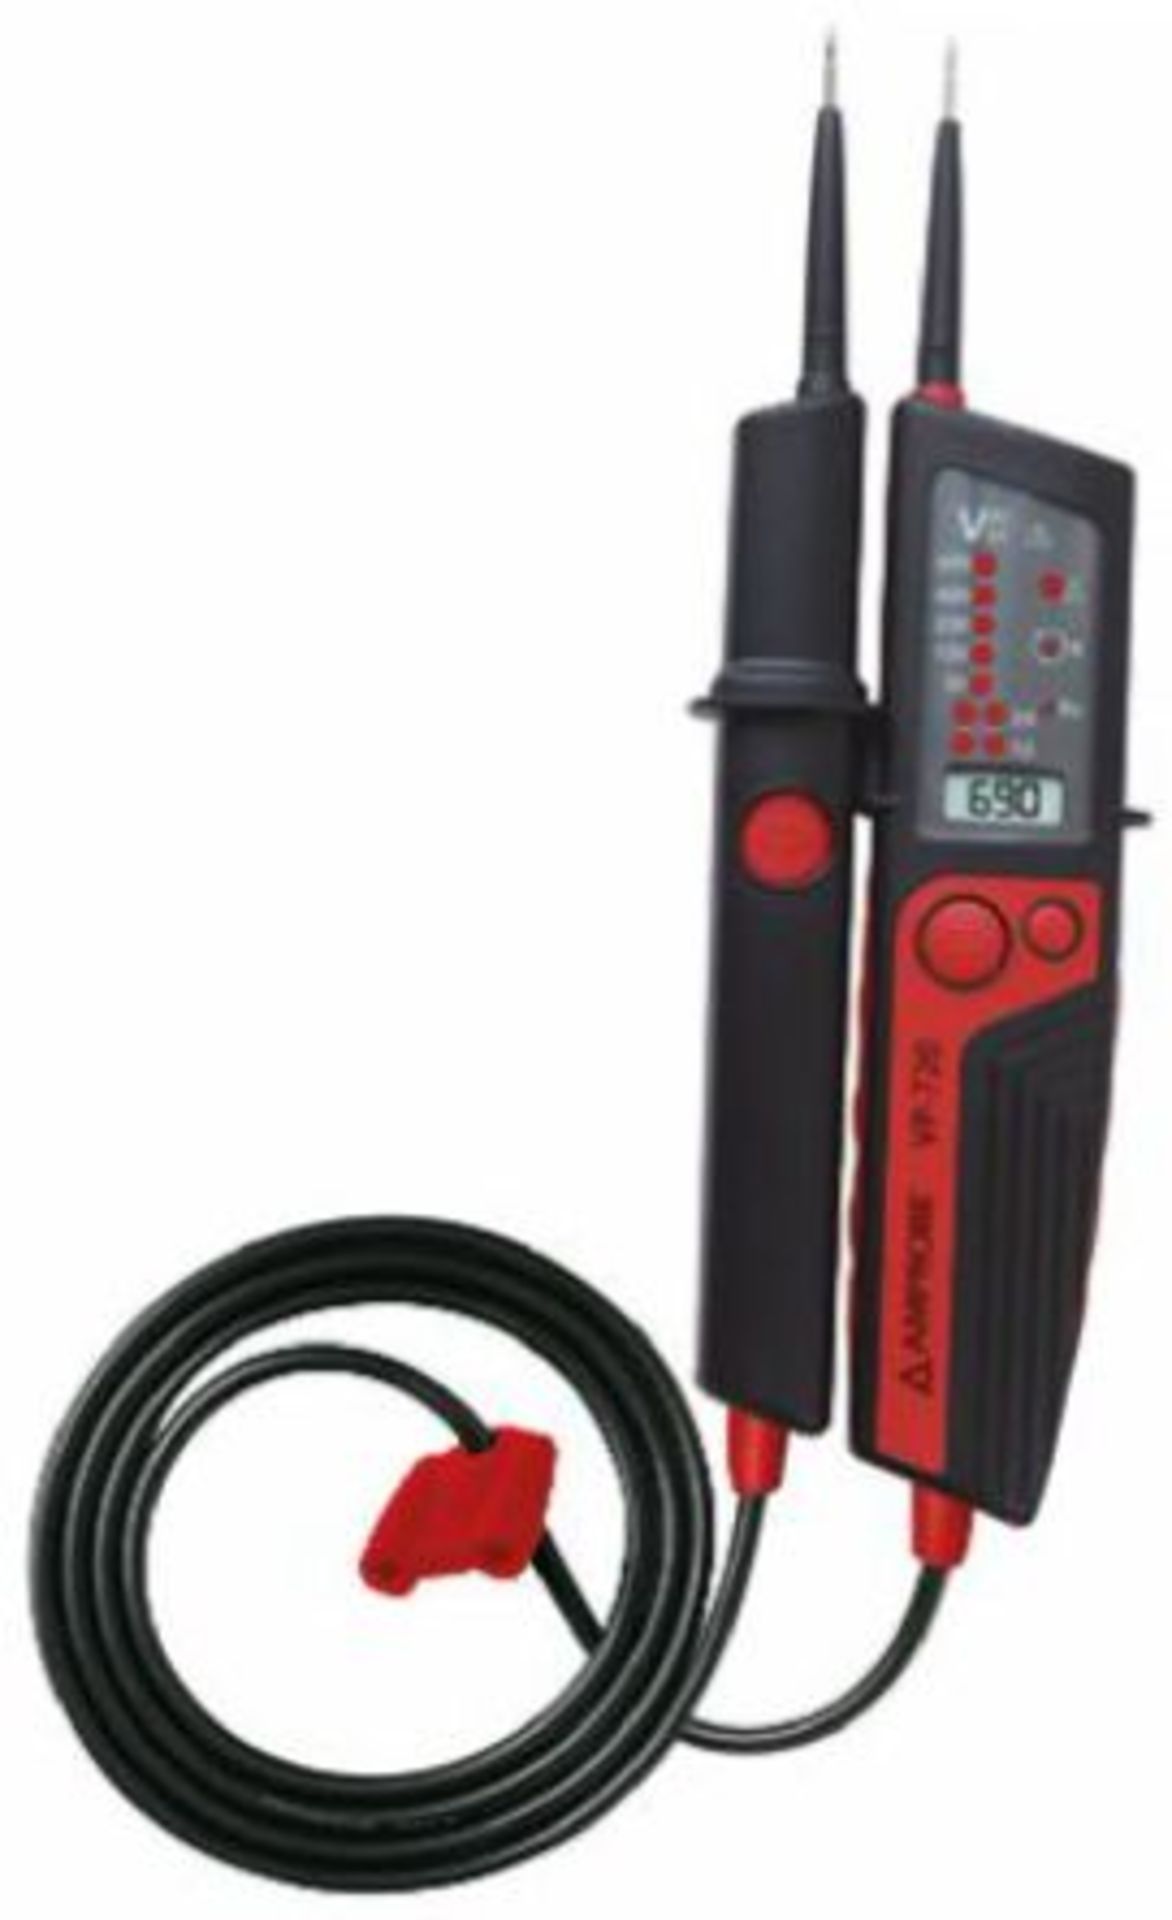 NEW Amprobe Voltage Tester RS7943156